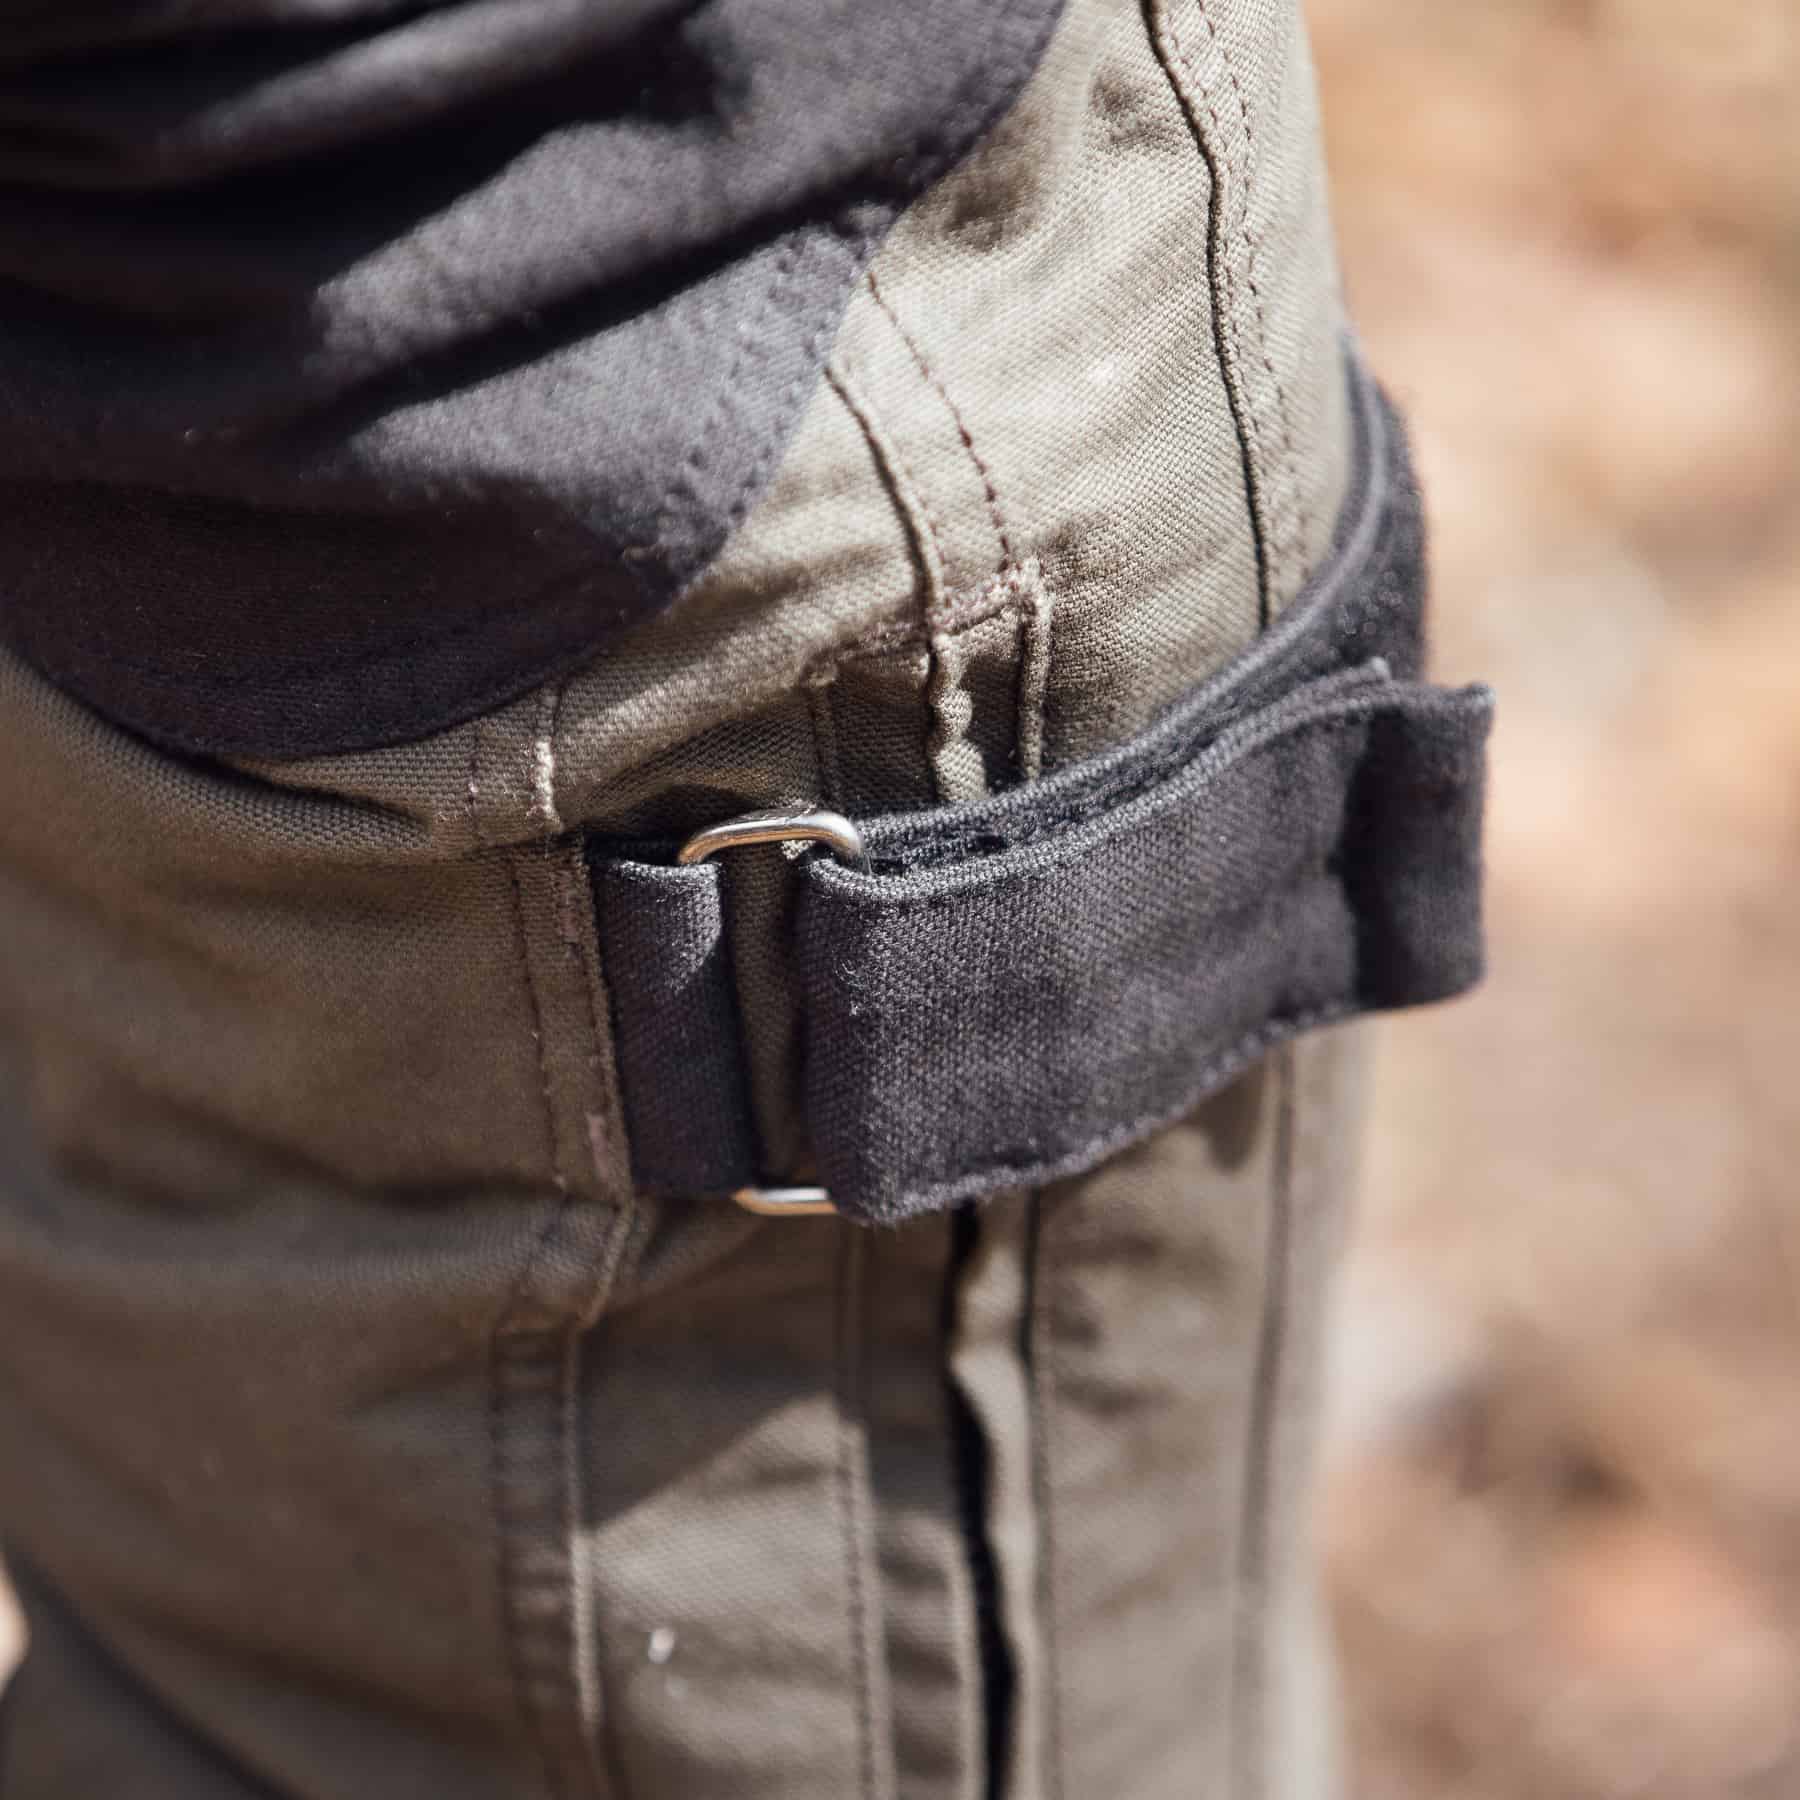 Merlin Mahala Cordura trousers in black and olive detail